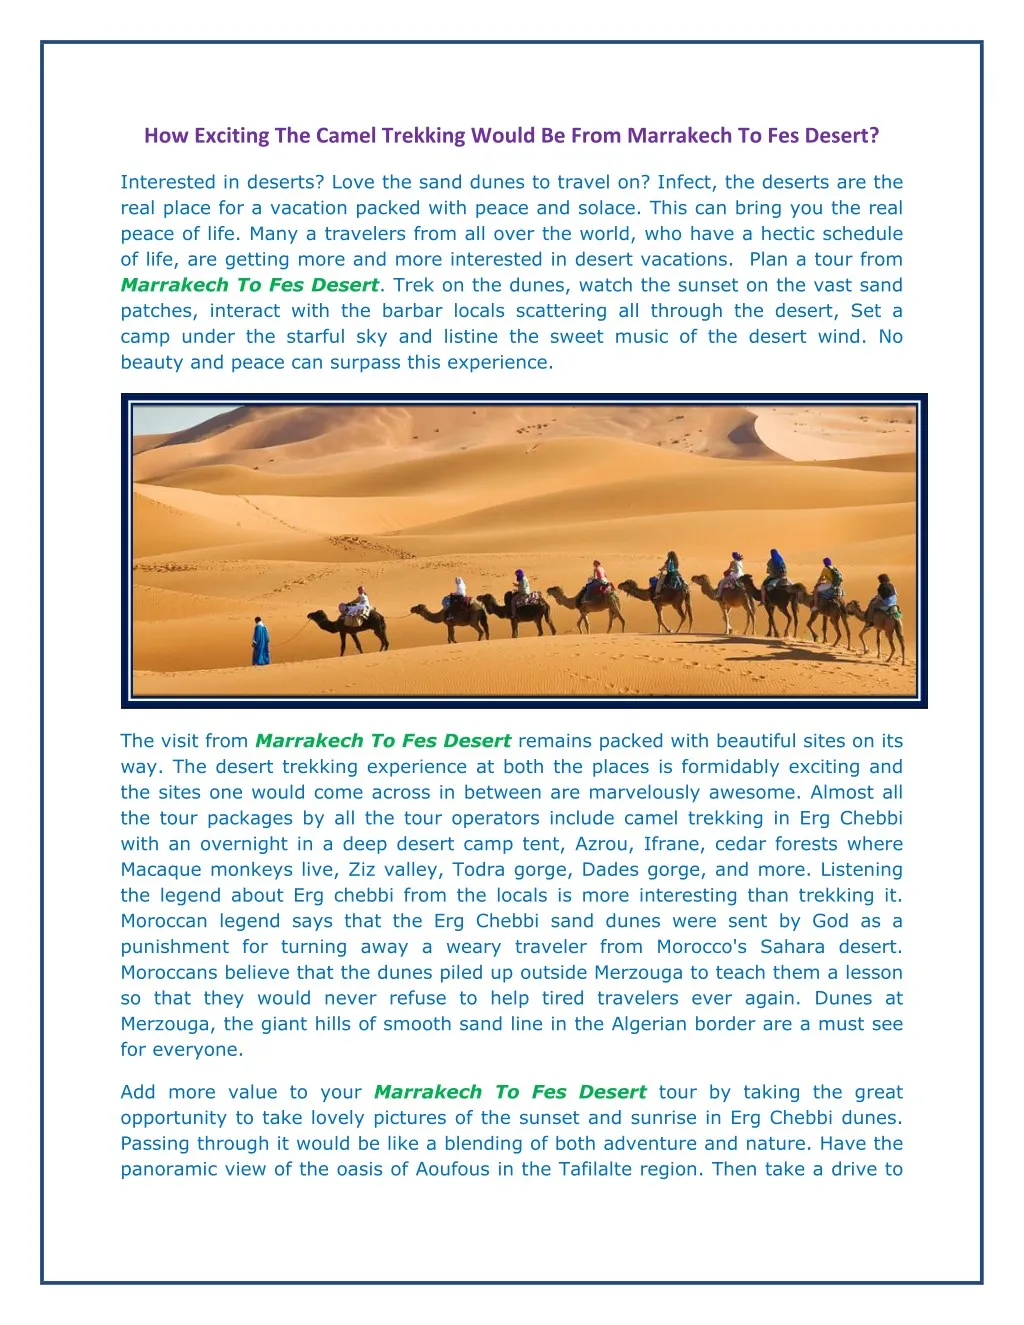 how exciting the camel trekking would be from